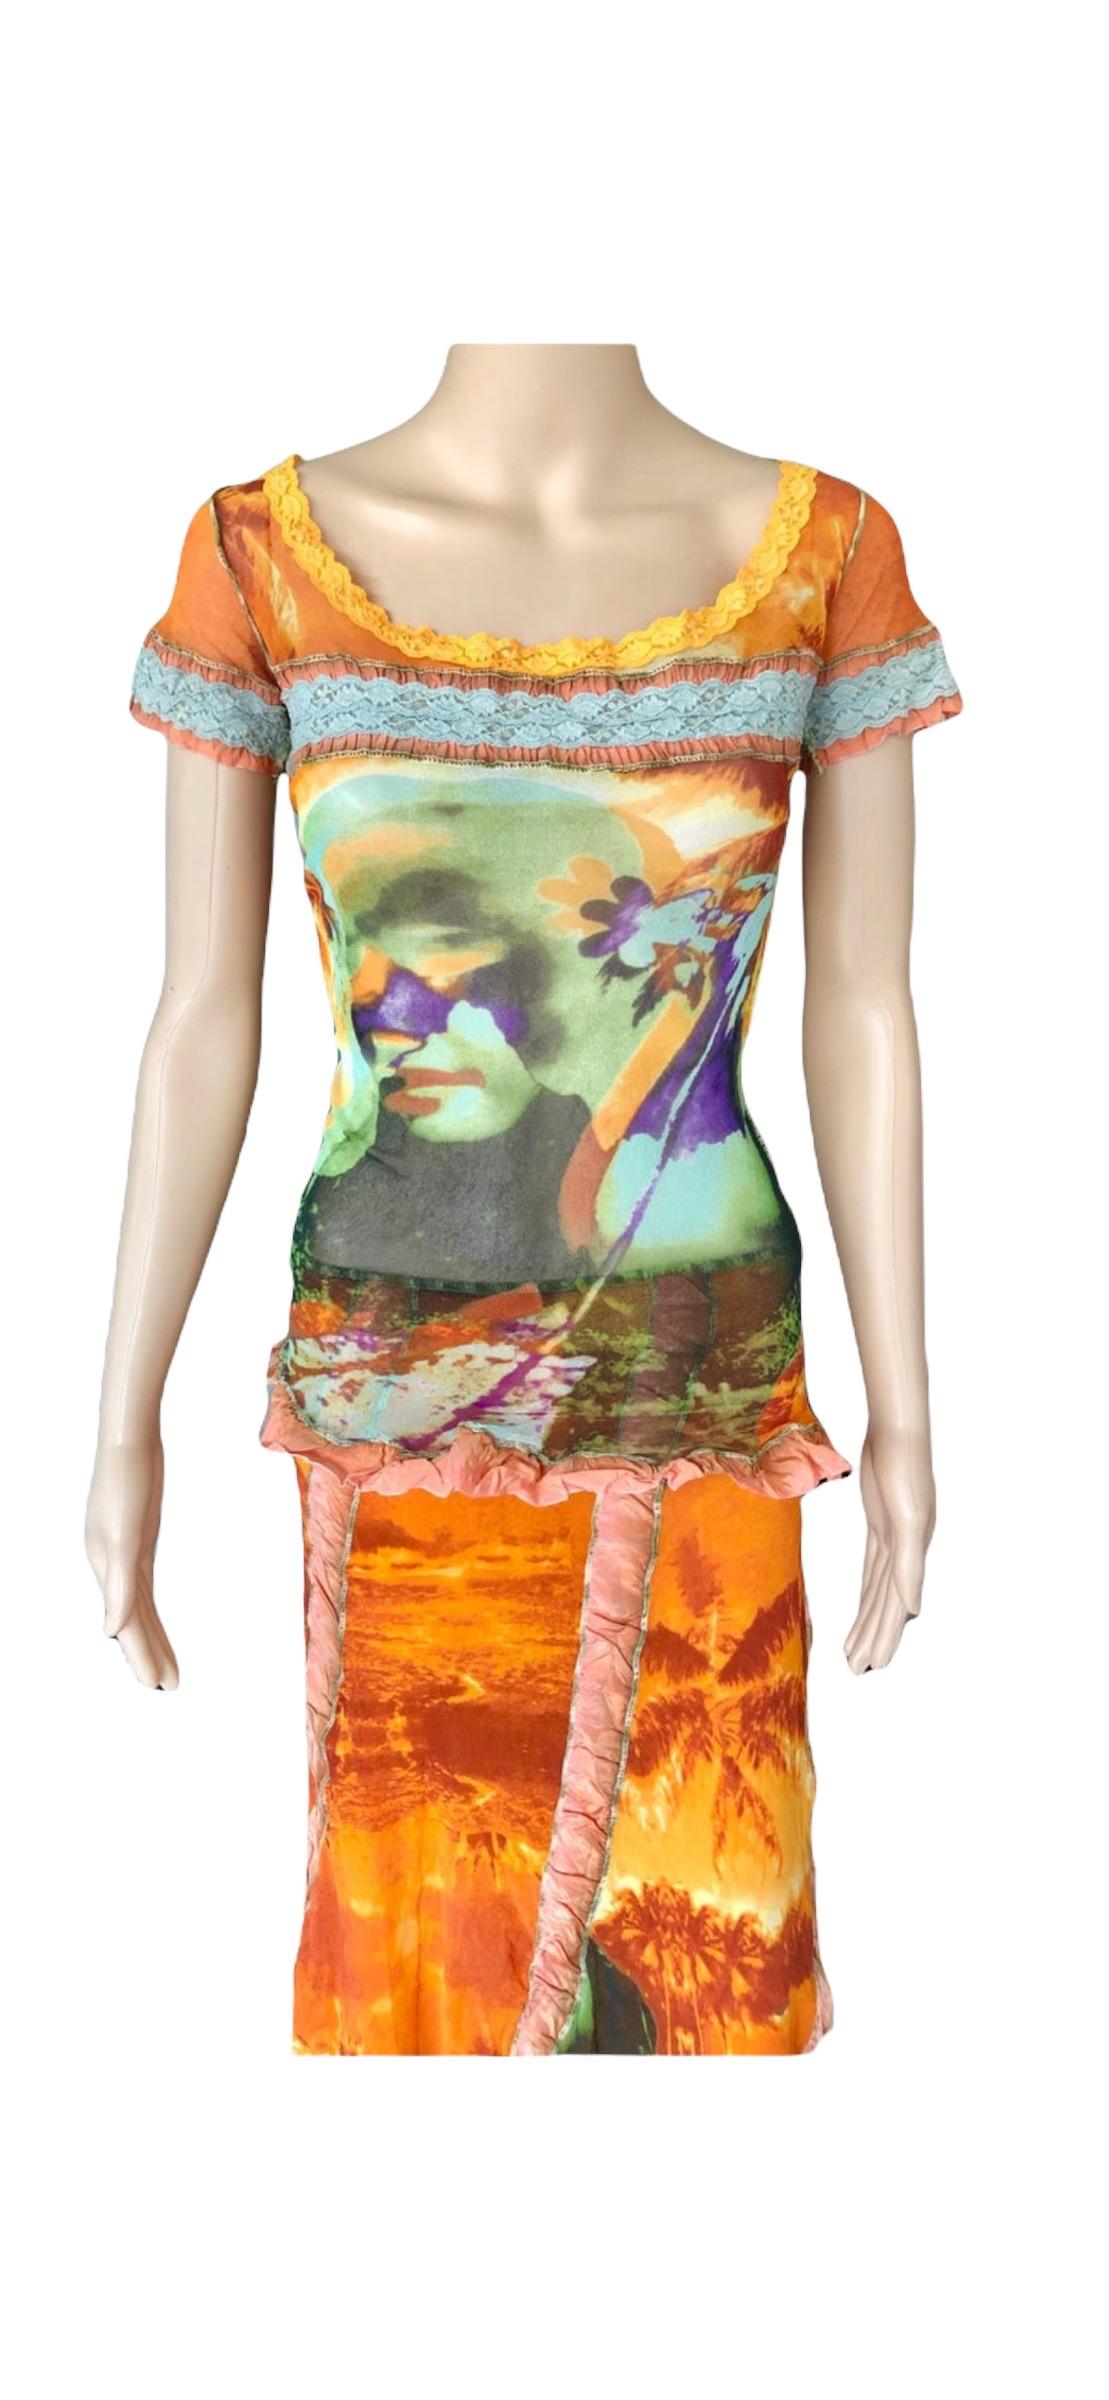 Jean Paul Gaultier S/S 2000 Abstract Psychedelic Top &Skirt Ensemble 2 Piece Set For Sale 7